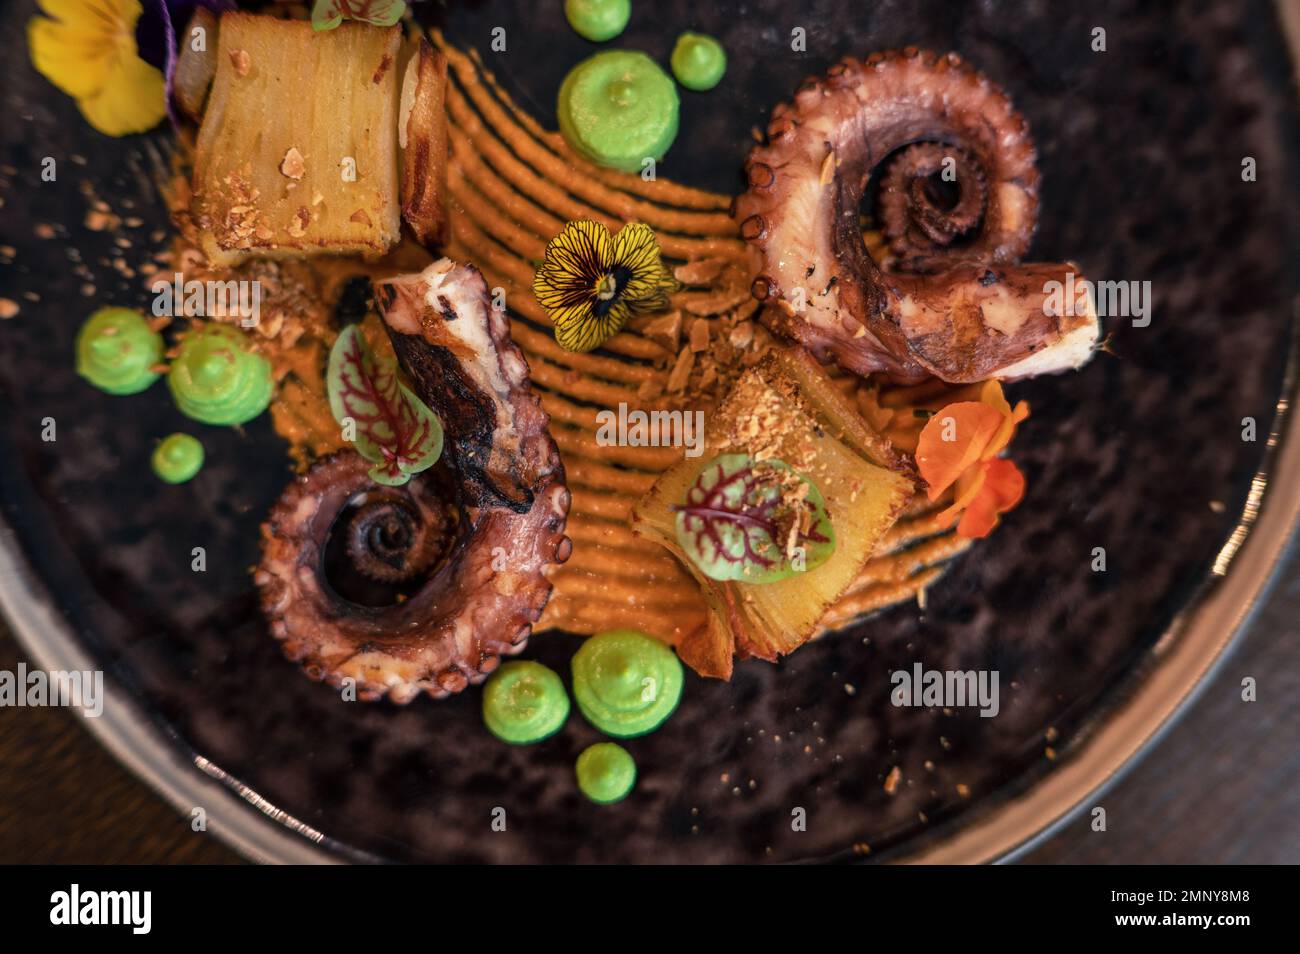 Octopus with potatoes on pea mash decorated with edible flowers Stock Photo